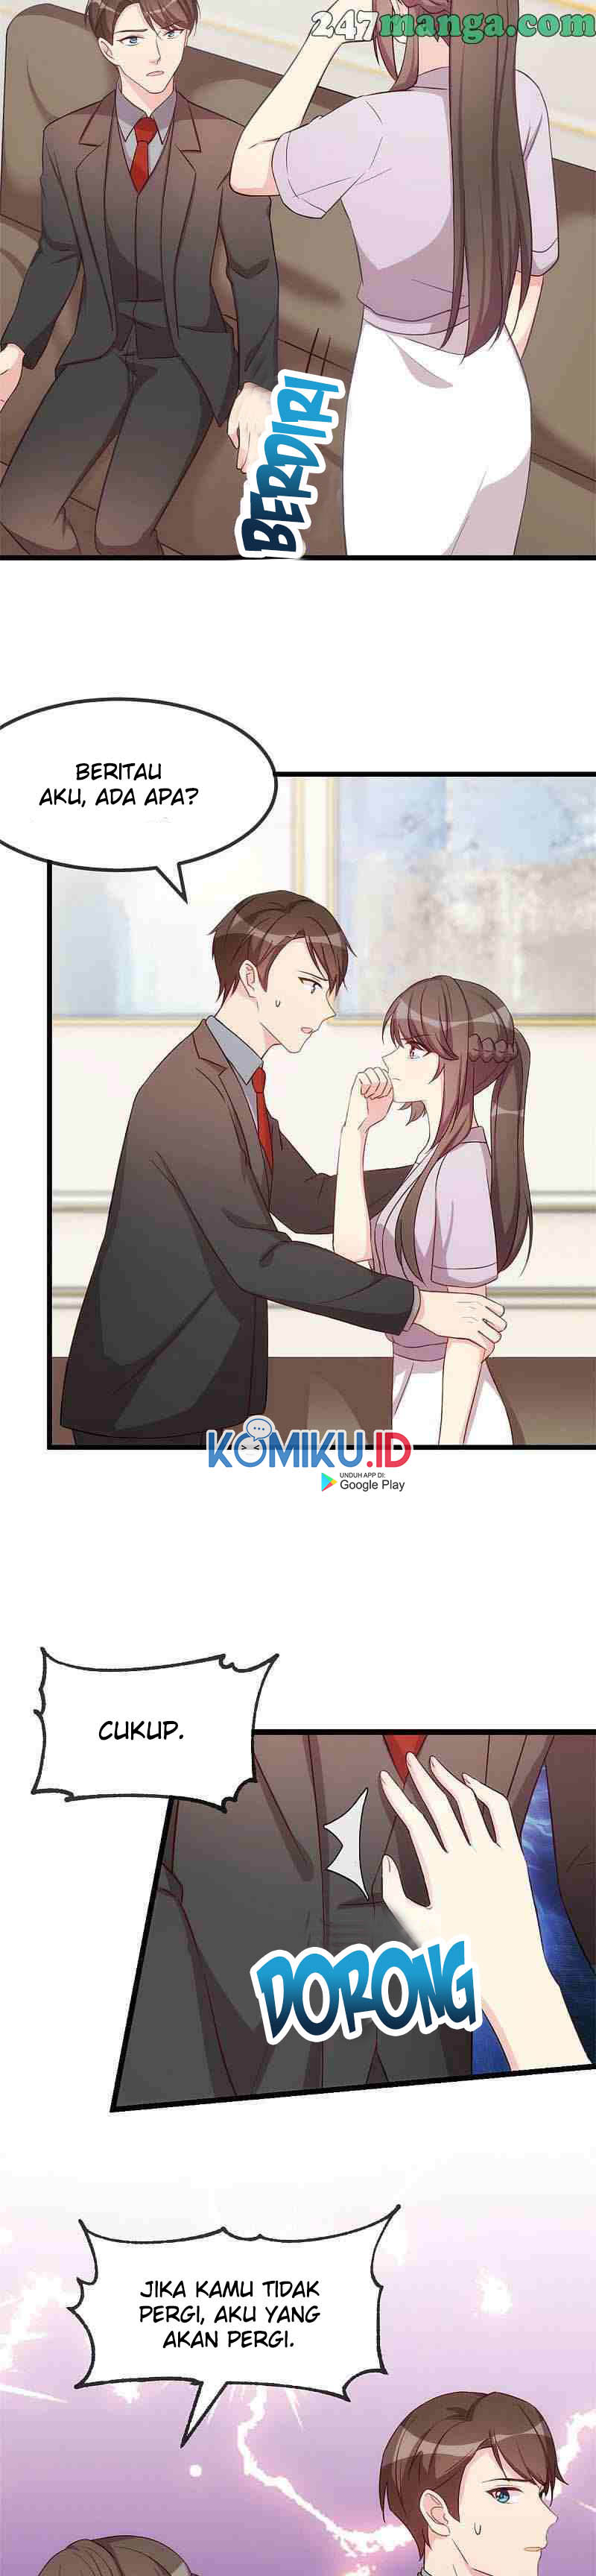 CEO’s Sudden Proposal Chapter 337 4